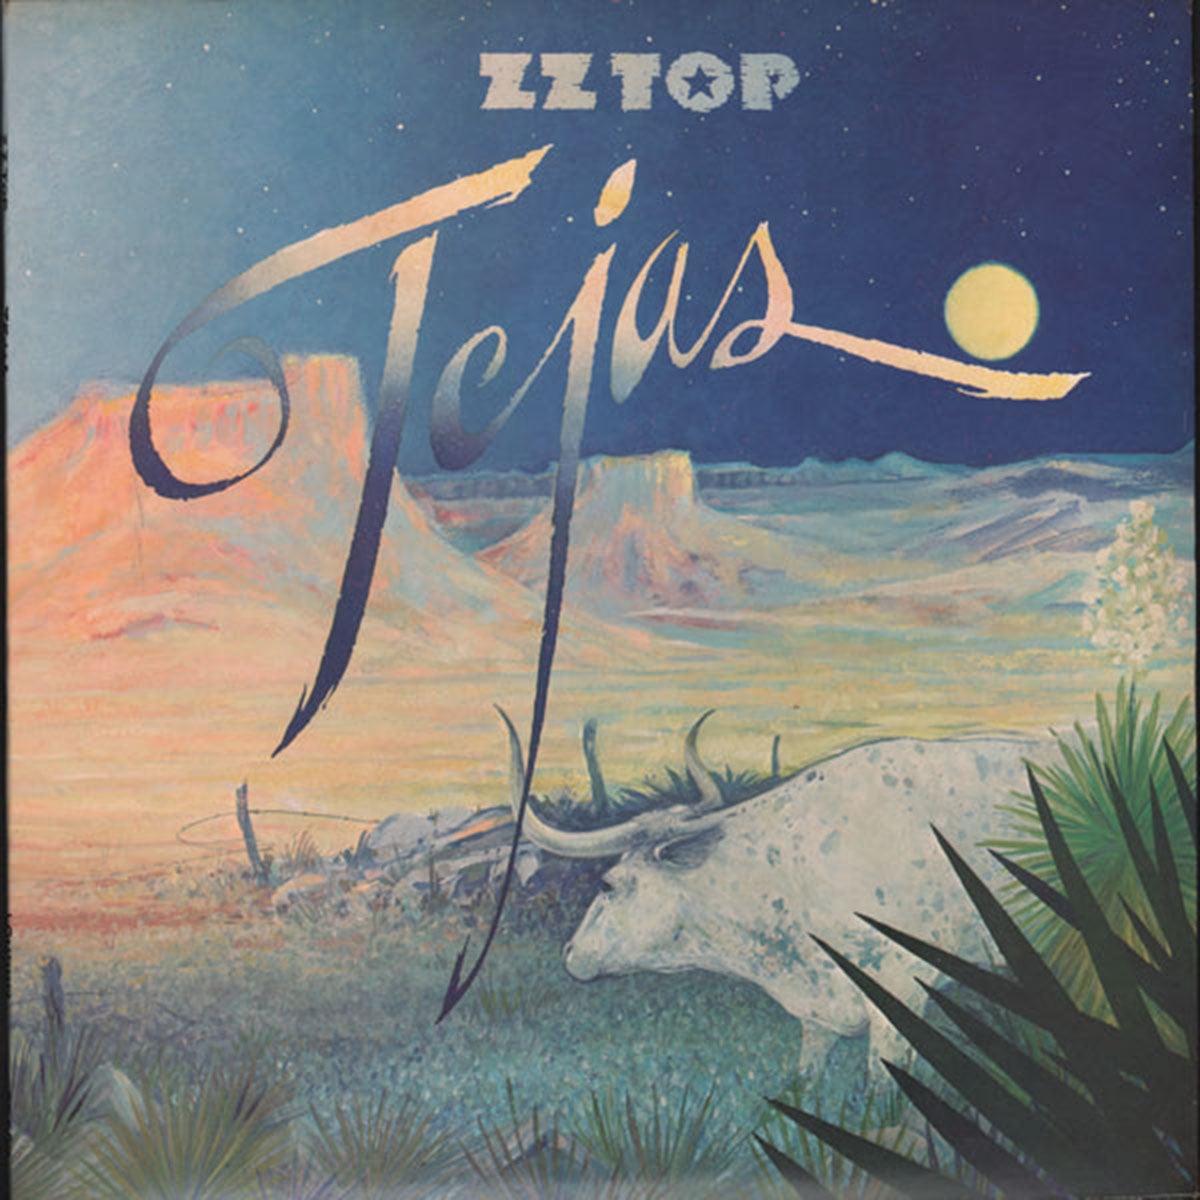 DAILY DEAL! ZZ Top – Tejas - Trifold Cover! 1976 Pressing!